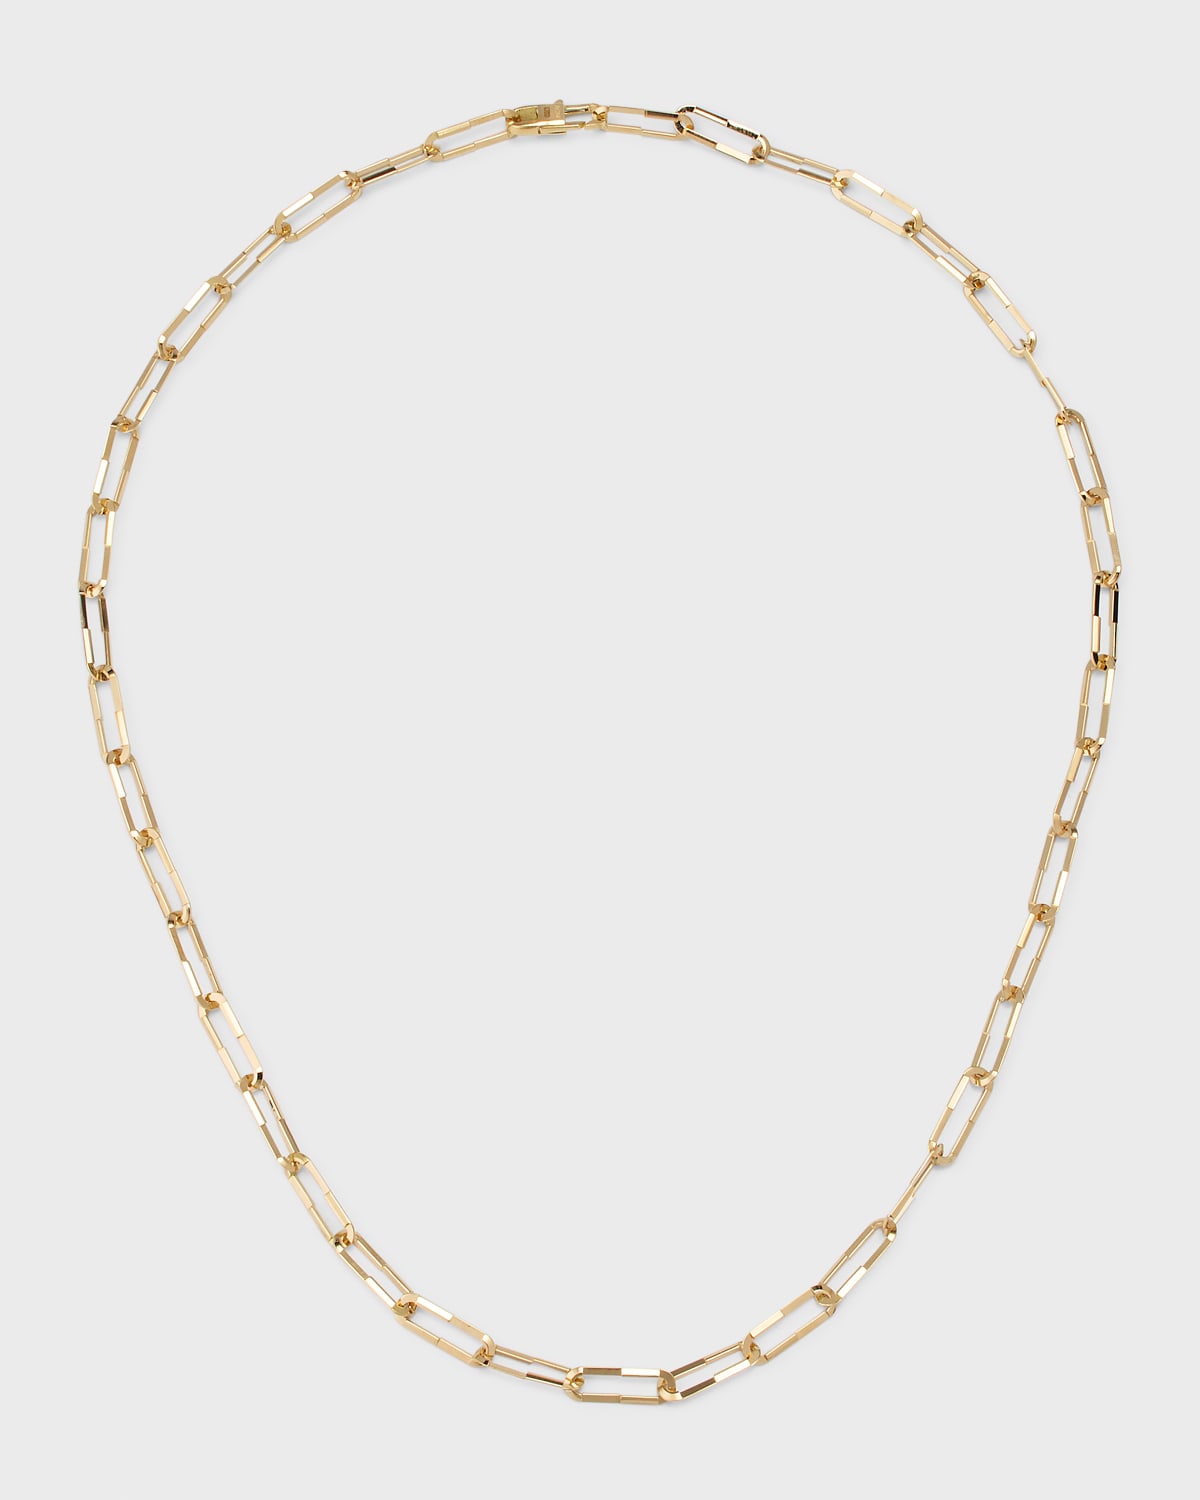 Link to Love Necklace in 18K Yellow Gold, 16.5"L